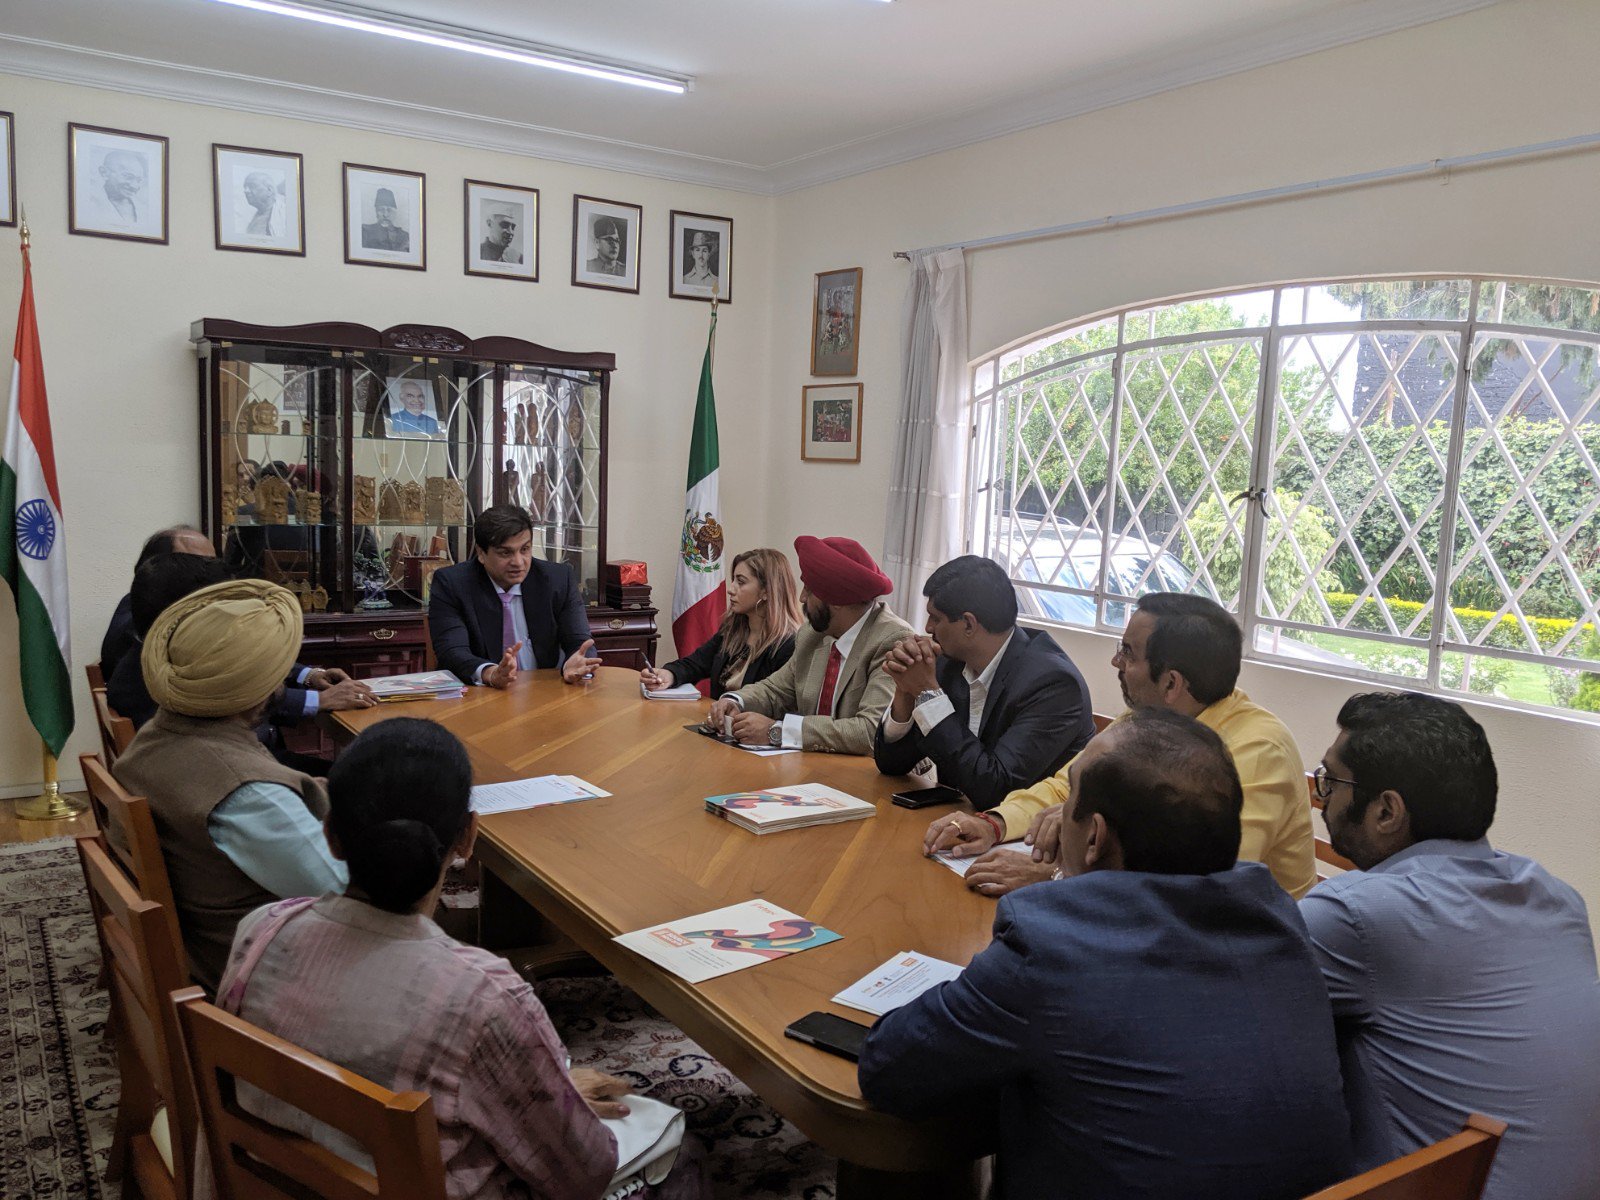 A delegation of visited Mexico on 27-28 June, 2019. The Council met with National Chamber of Textiles, National Chamber of Apparels, Indian textile merchants and Chamber of Commerce of Guadalajara.